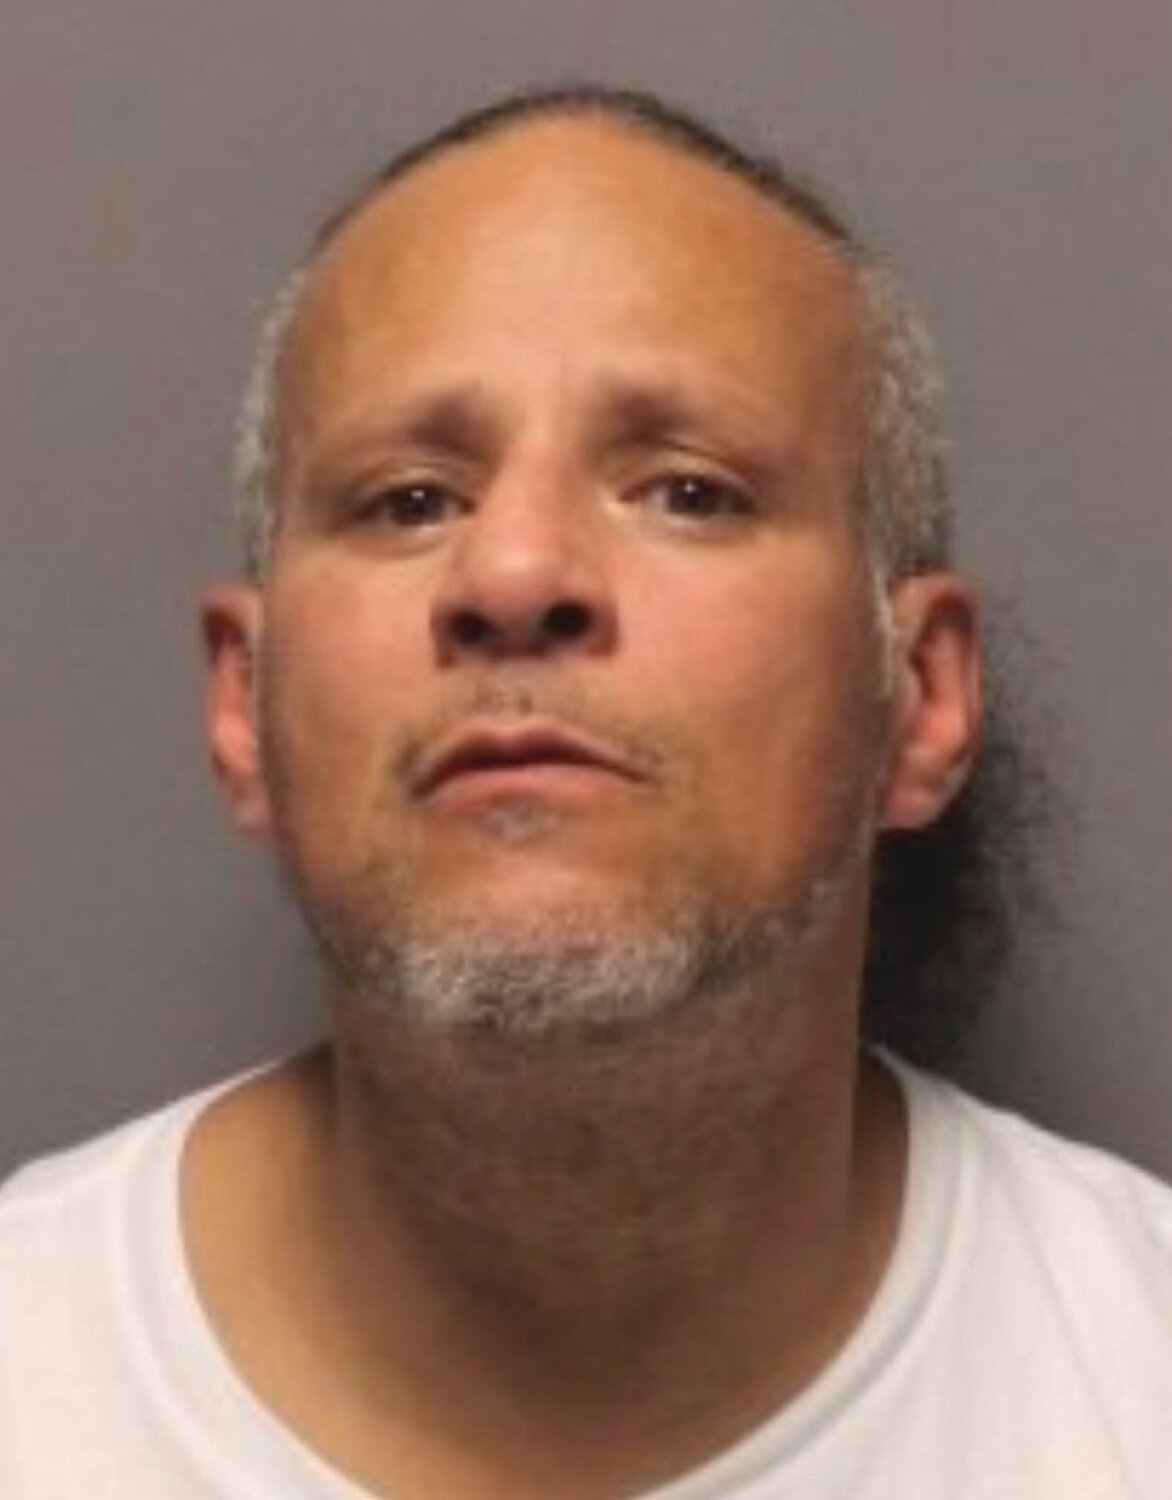 ‘PORCH PIRATE’ CHARGED: On Thursday, Nov. 2 around 12 p.m., Johnston Police investigated their first porch piracy incident of the year. Police charged Joseph Parra, 49, of Houston St., Providence, with misdemeanor larceny. The incident was captured on home surveillance.